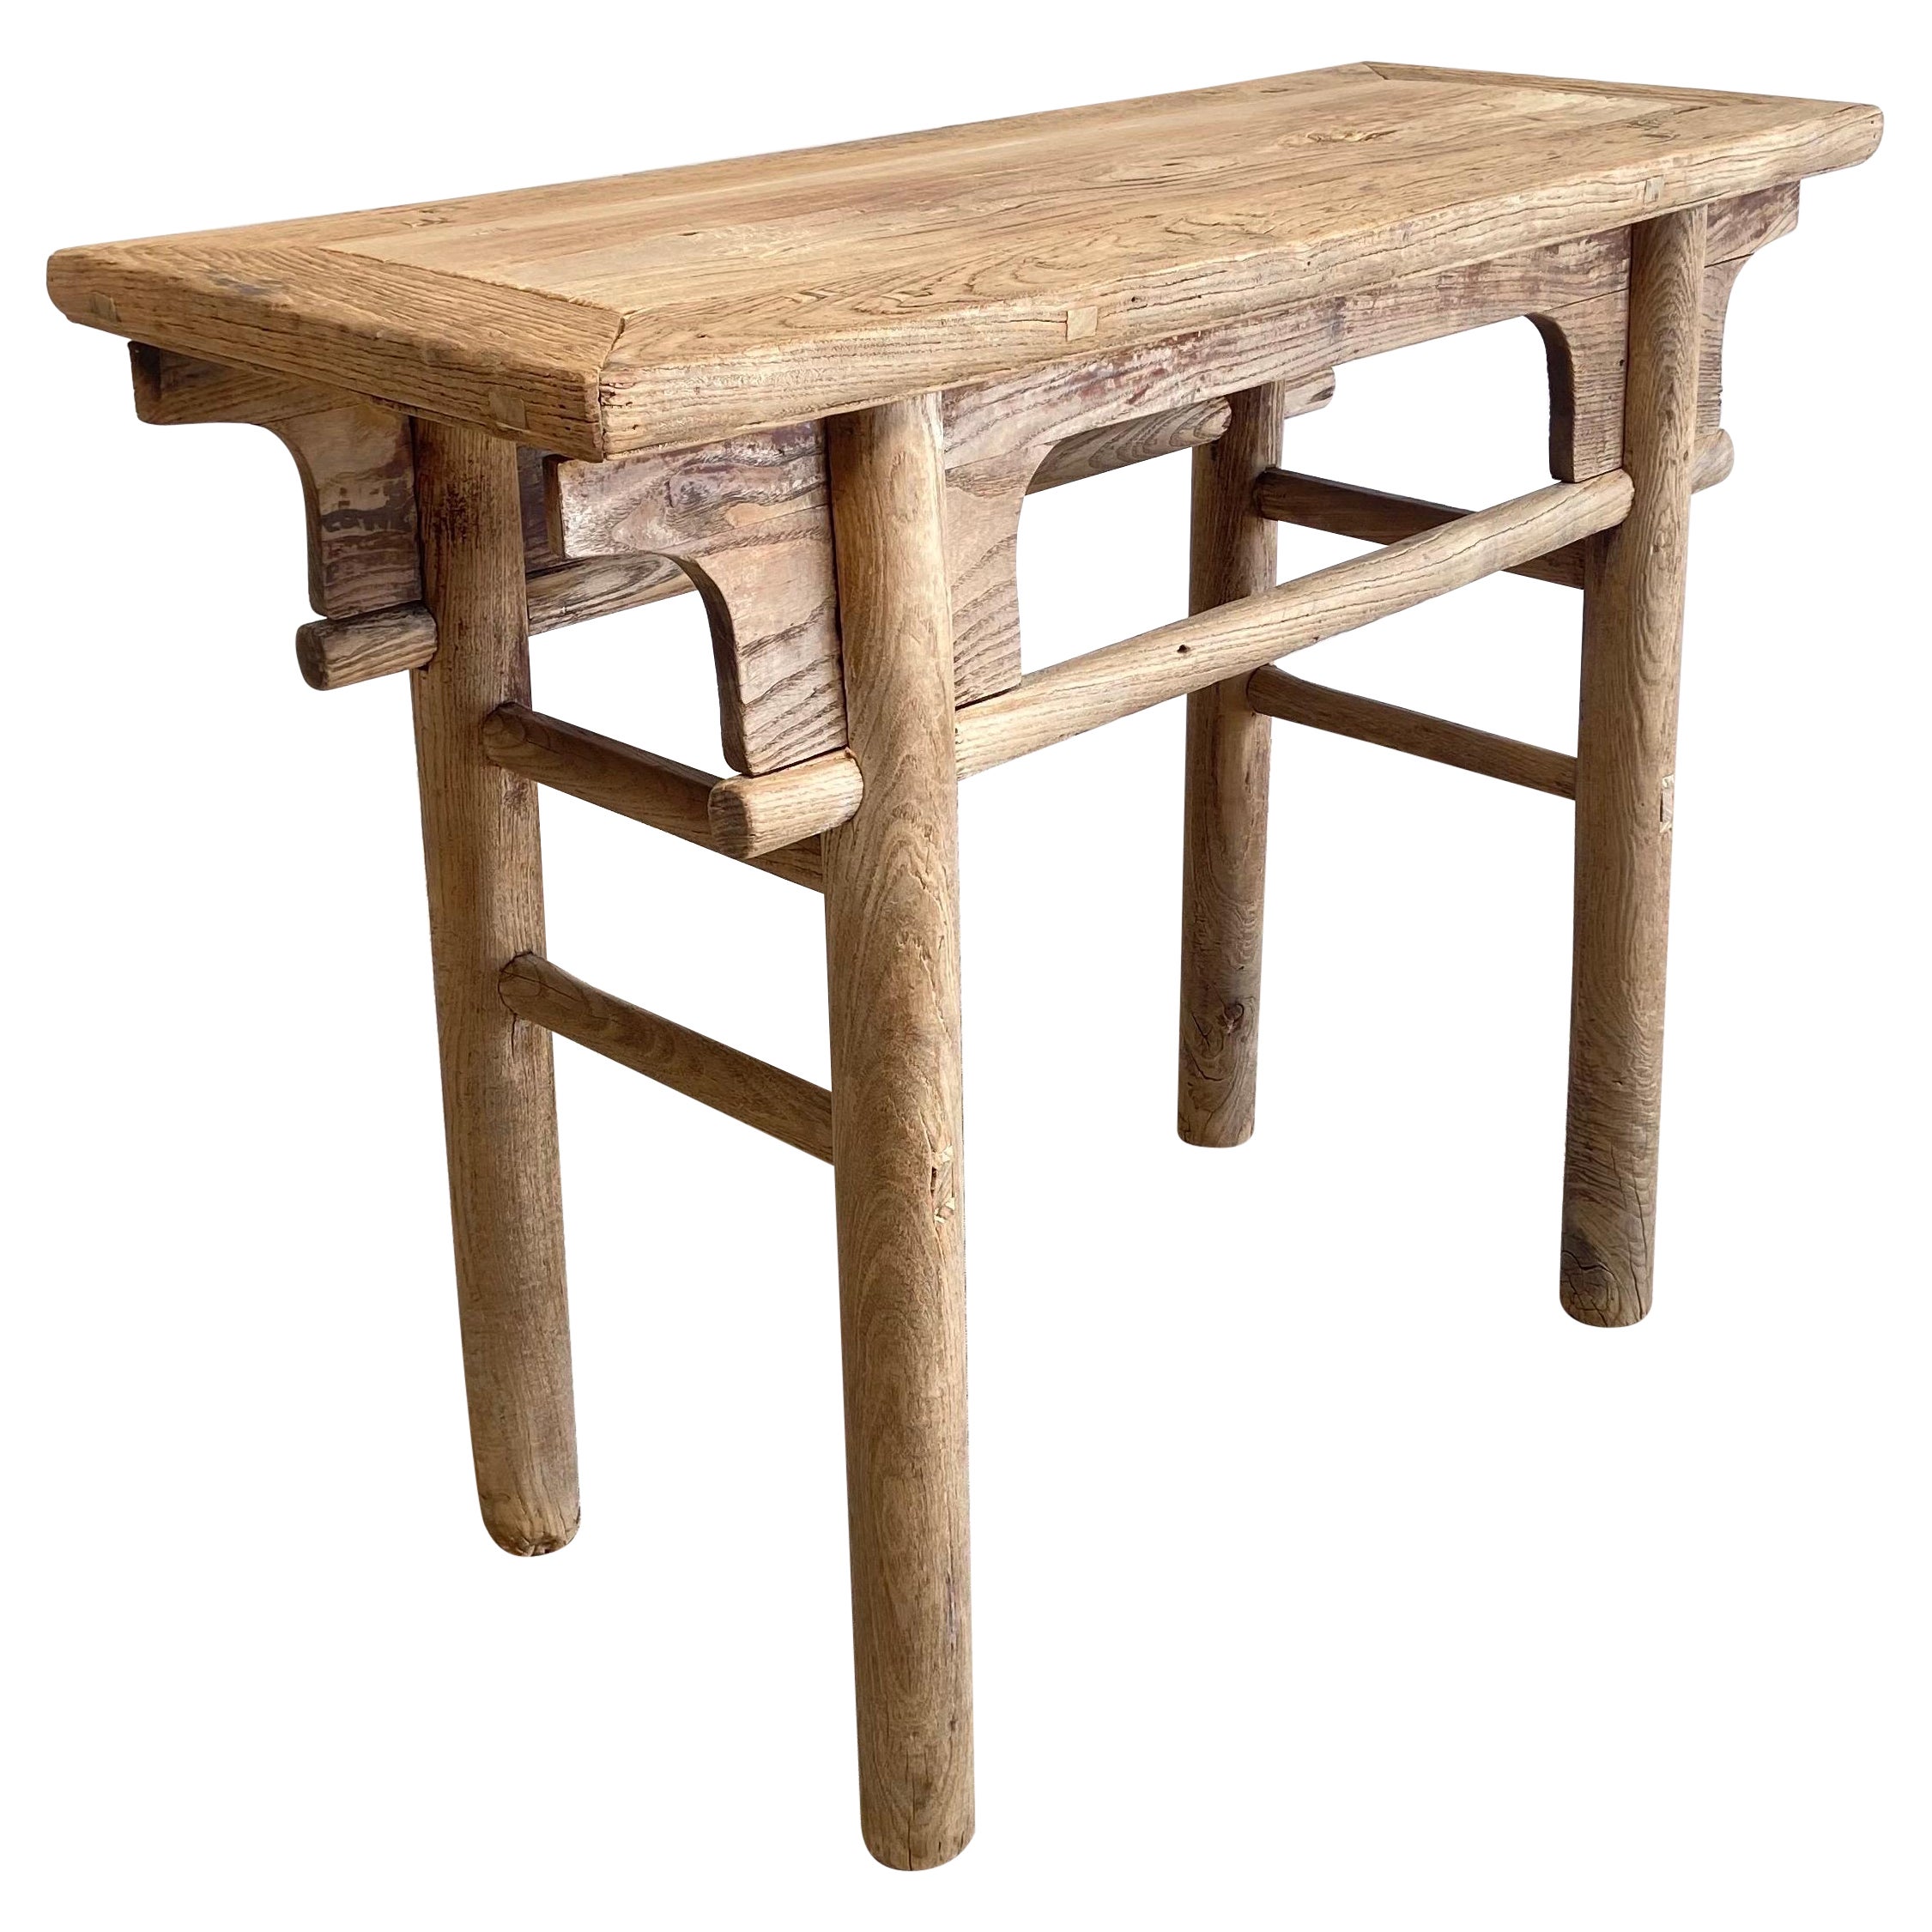 Vintage Elm Wood Console Table with Round Legs